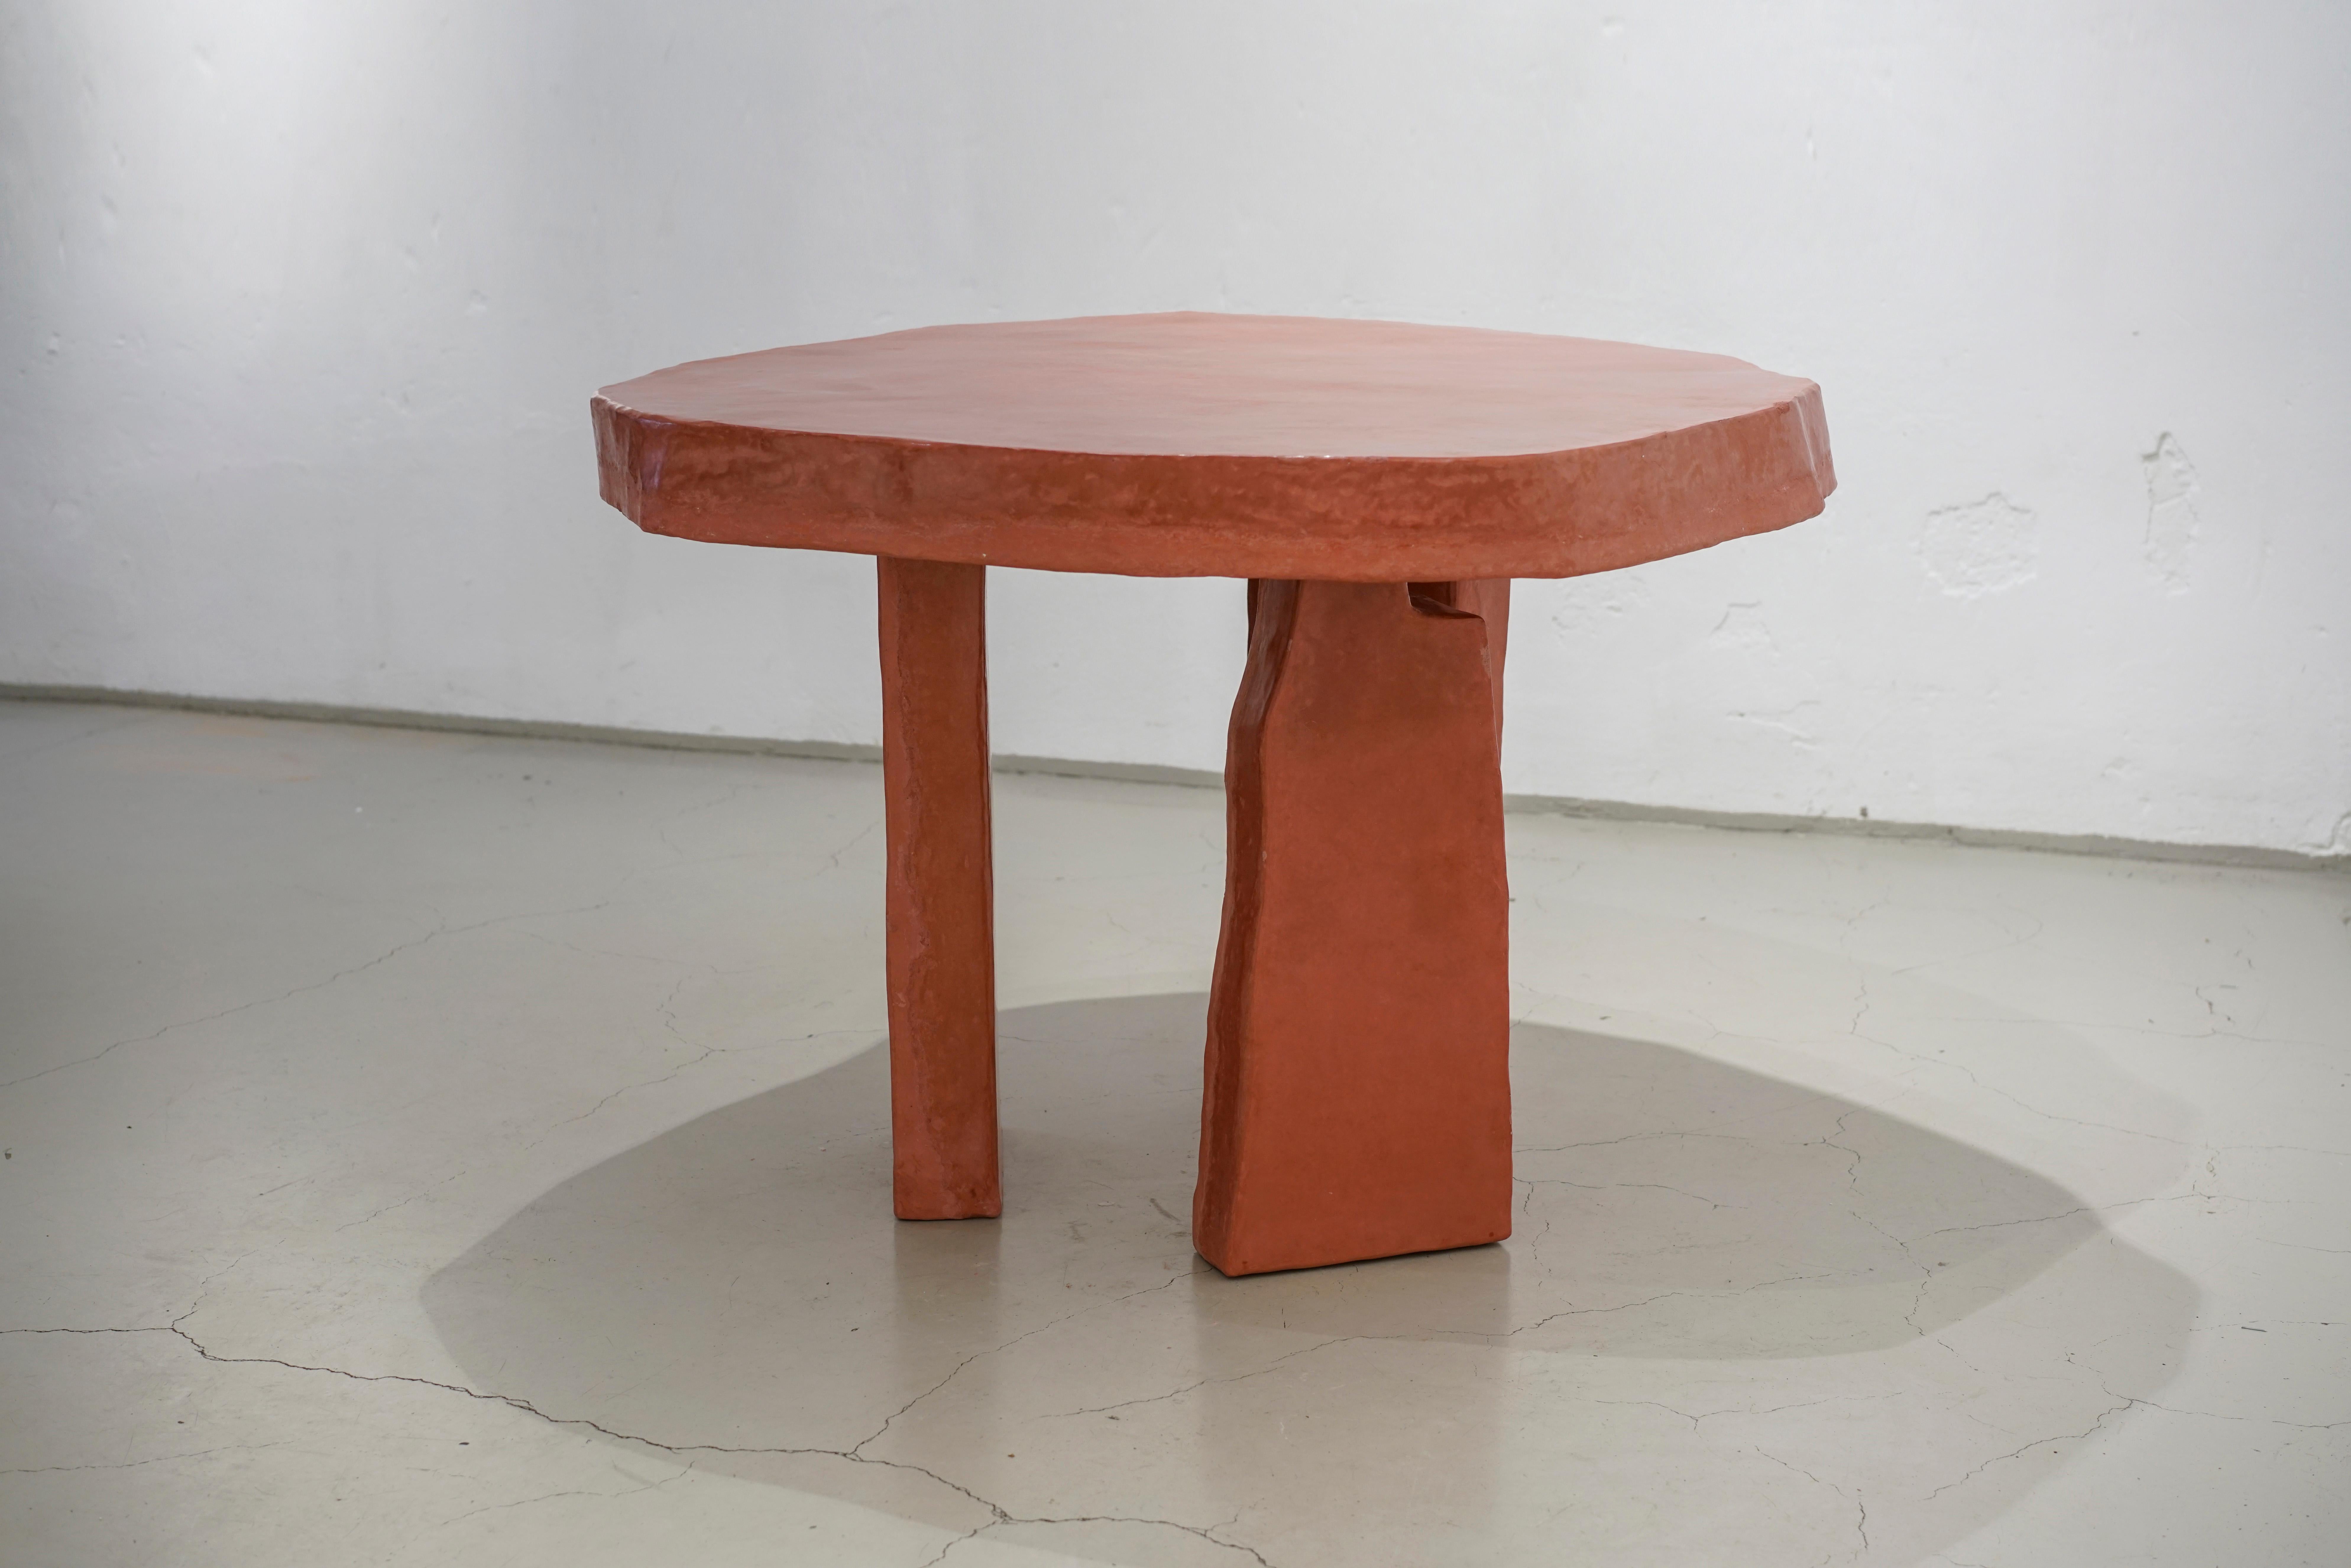 lime plaster table